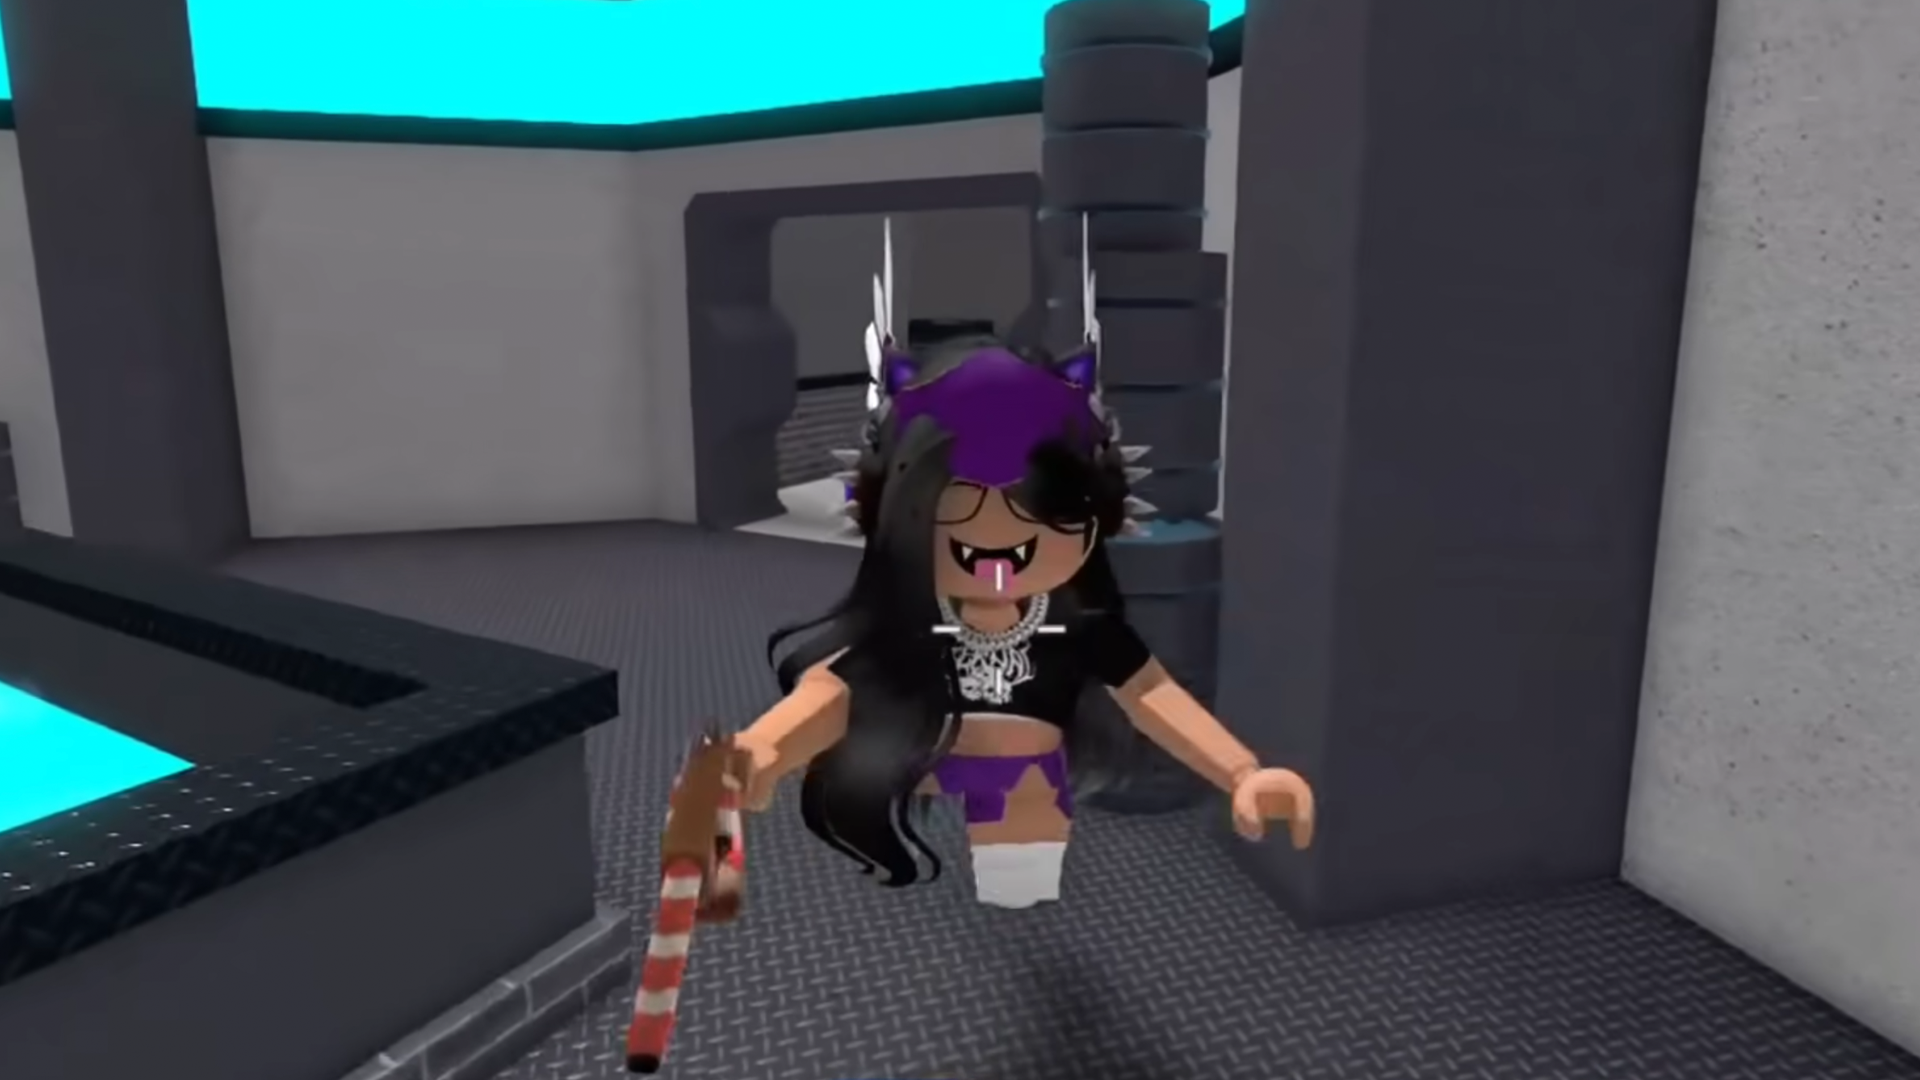 I Attended a ROBLOX MURDER MYSTERY PARTY!!!